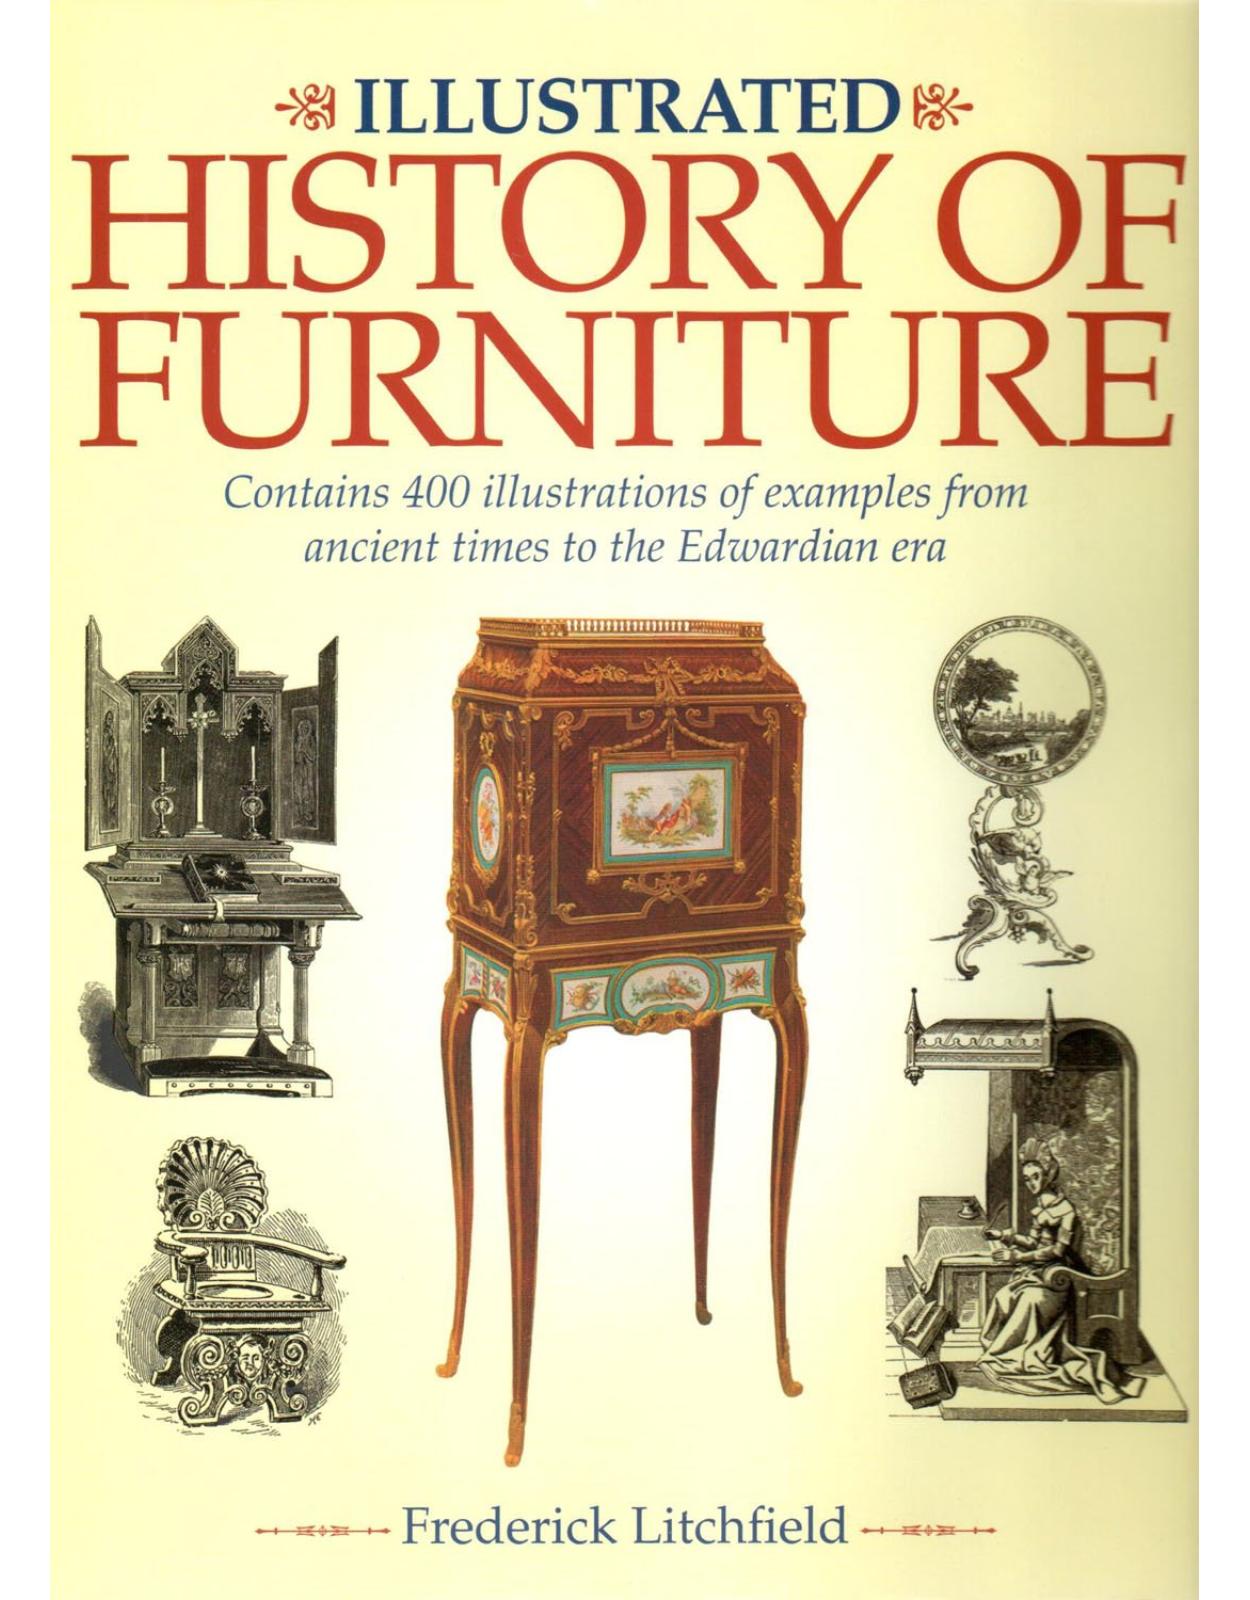 Illustrated History of Furniture: Contains 400 Illustrations of Examples from Ancient Times to the Edwardian Era